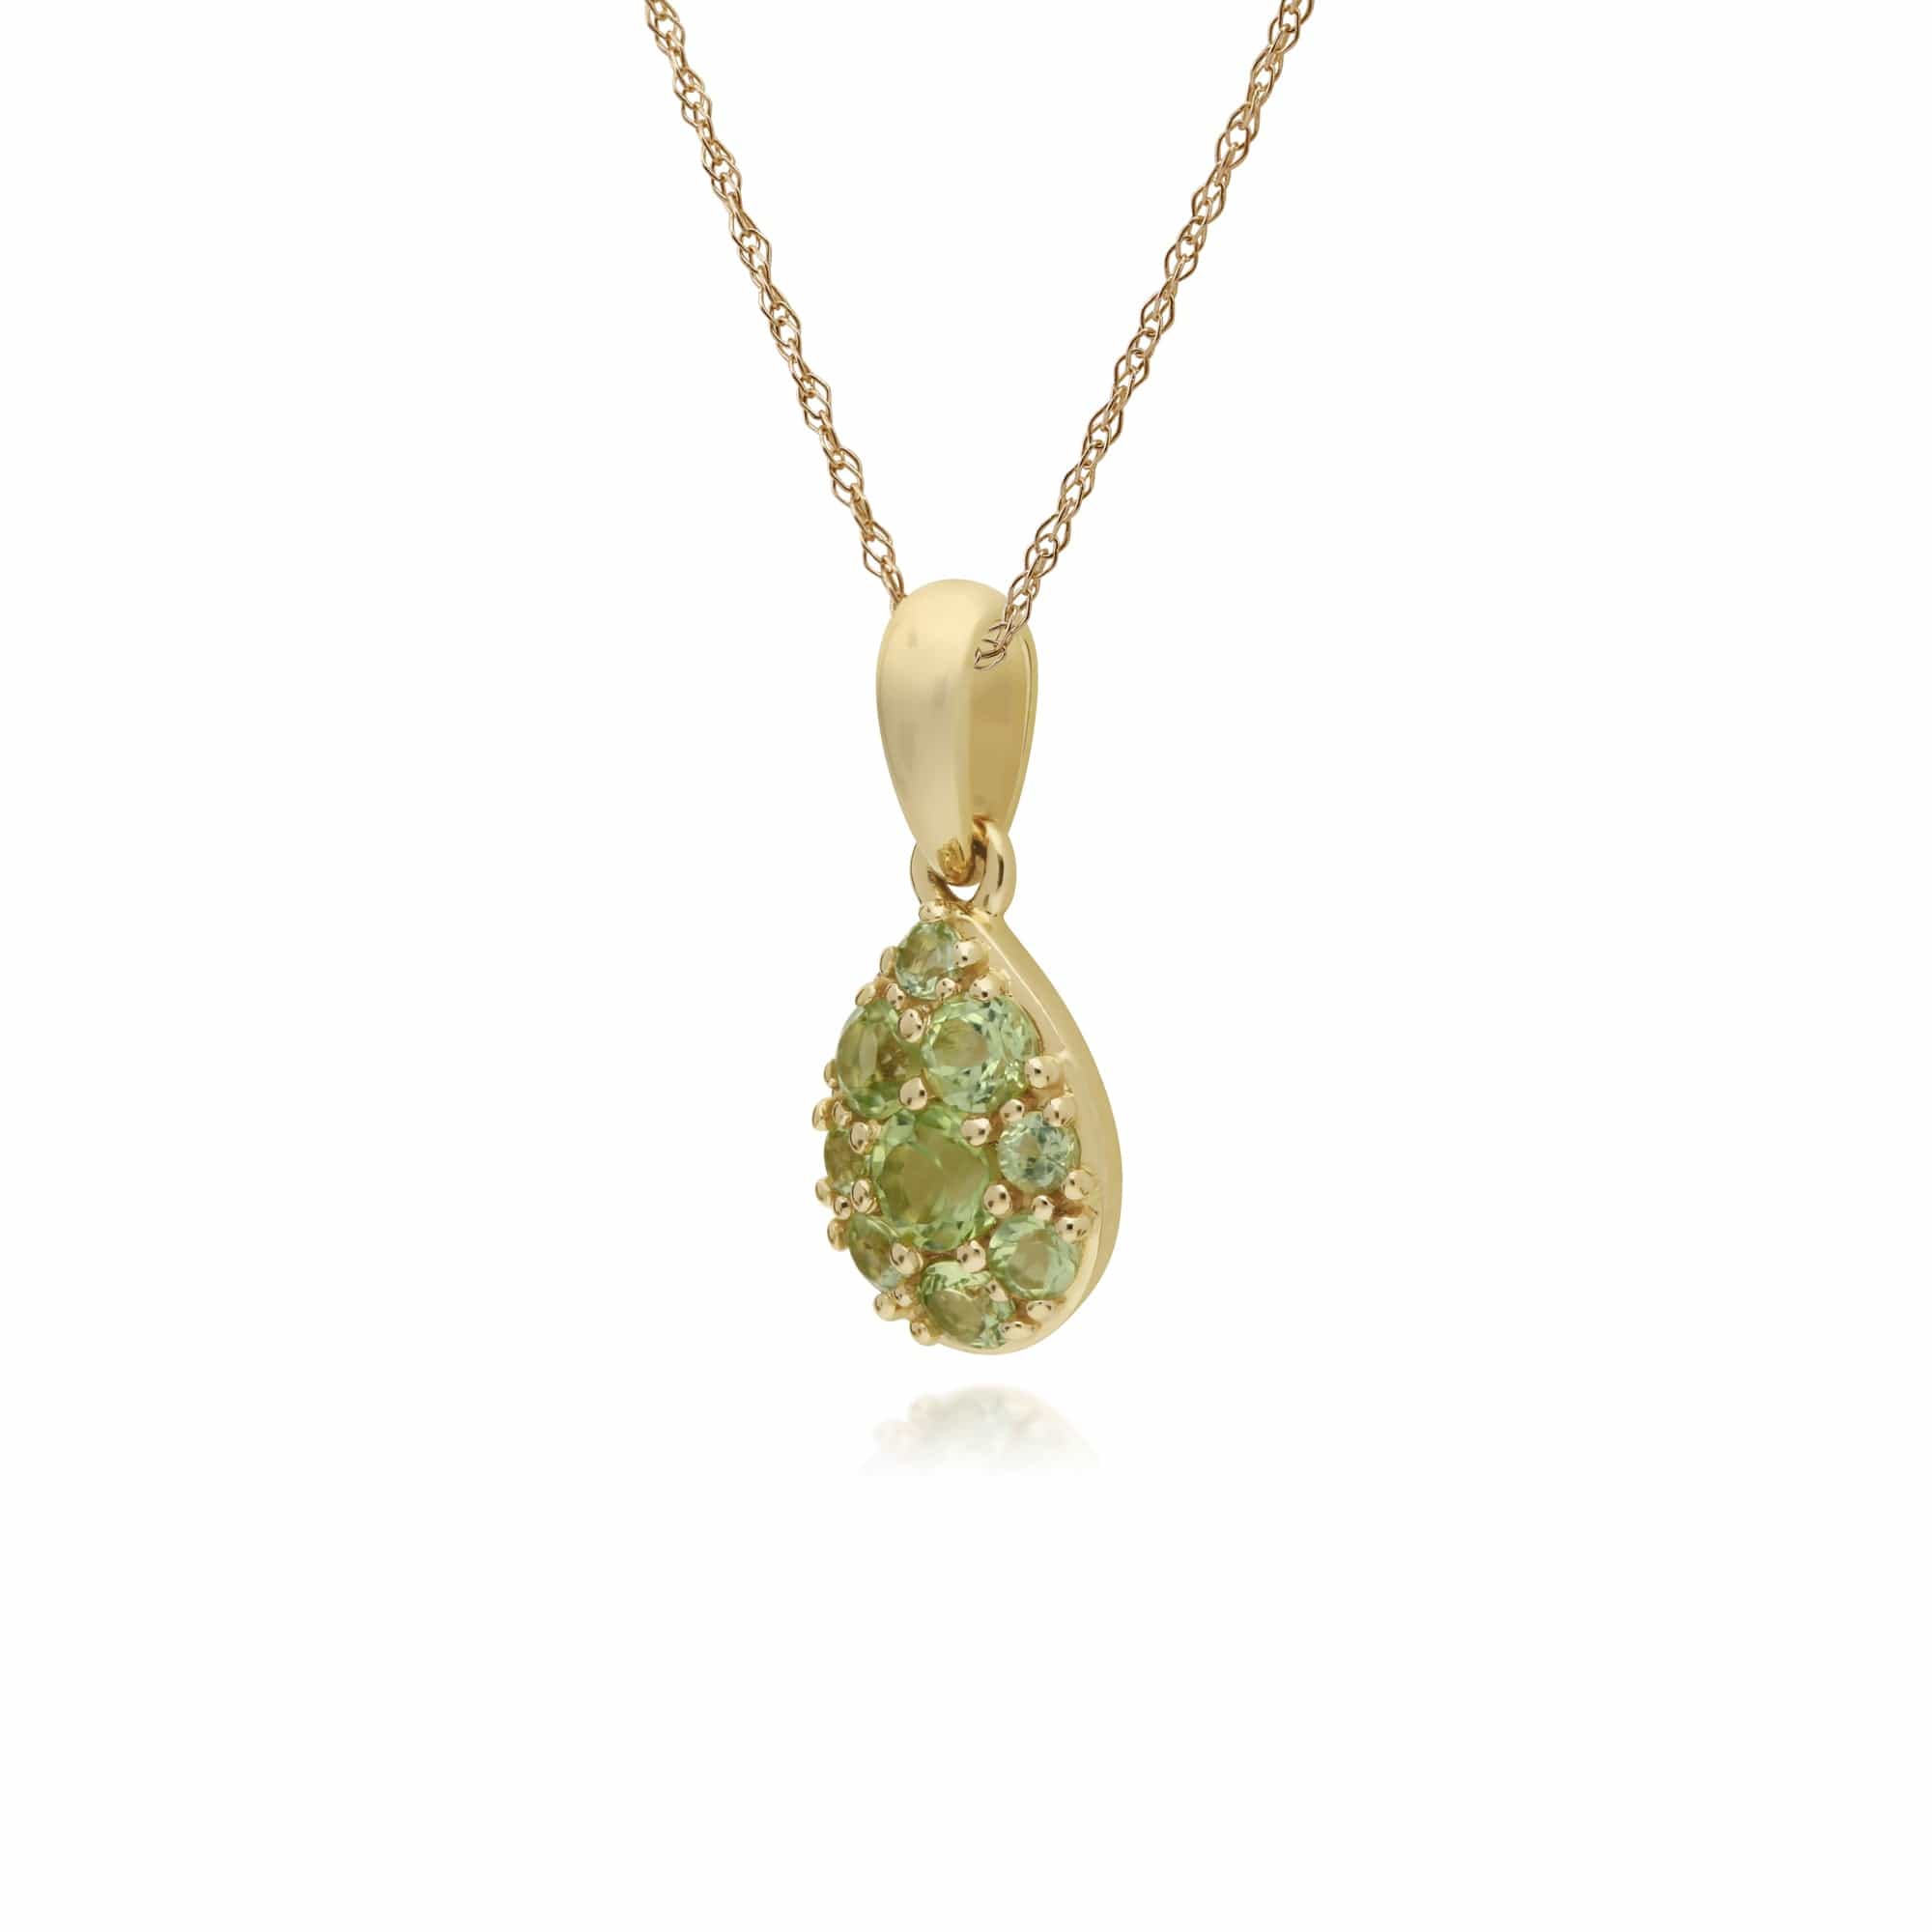 Cluster Round Peridot Pear Shaped Pendant & Chain in 9ct Yellow Gold - Gemondo